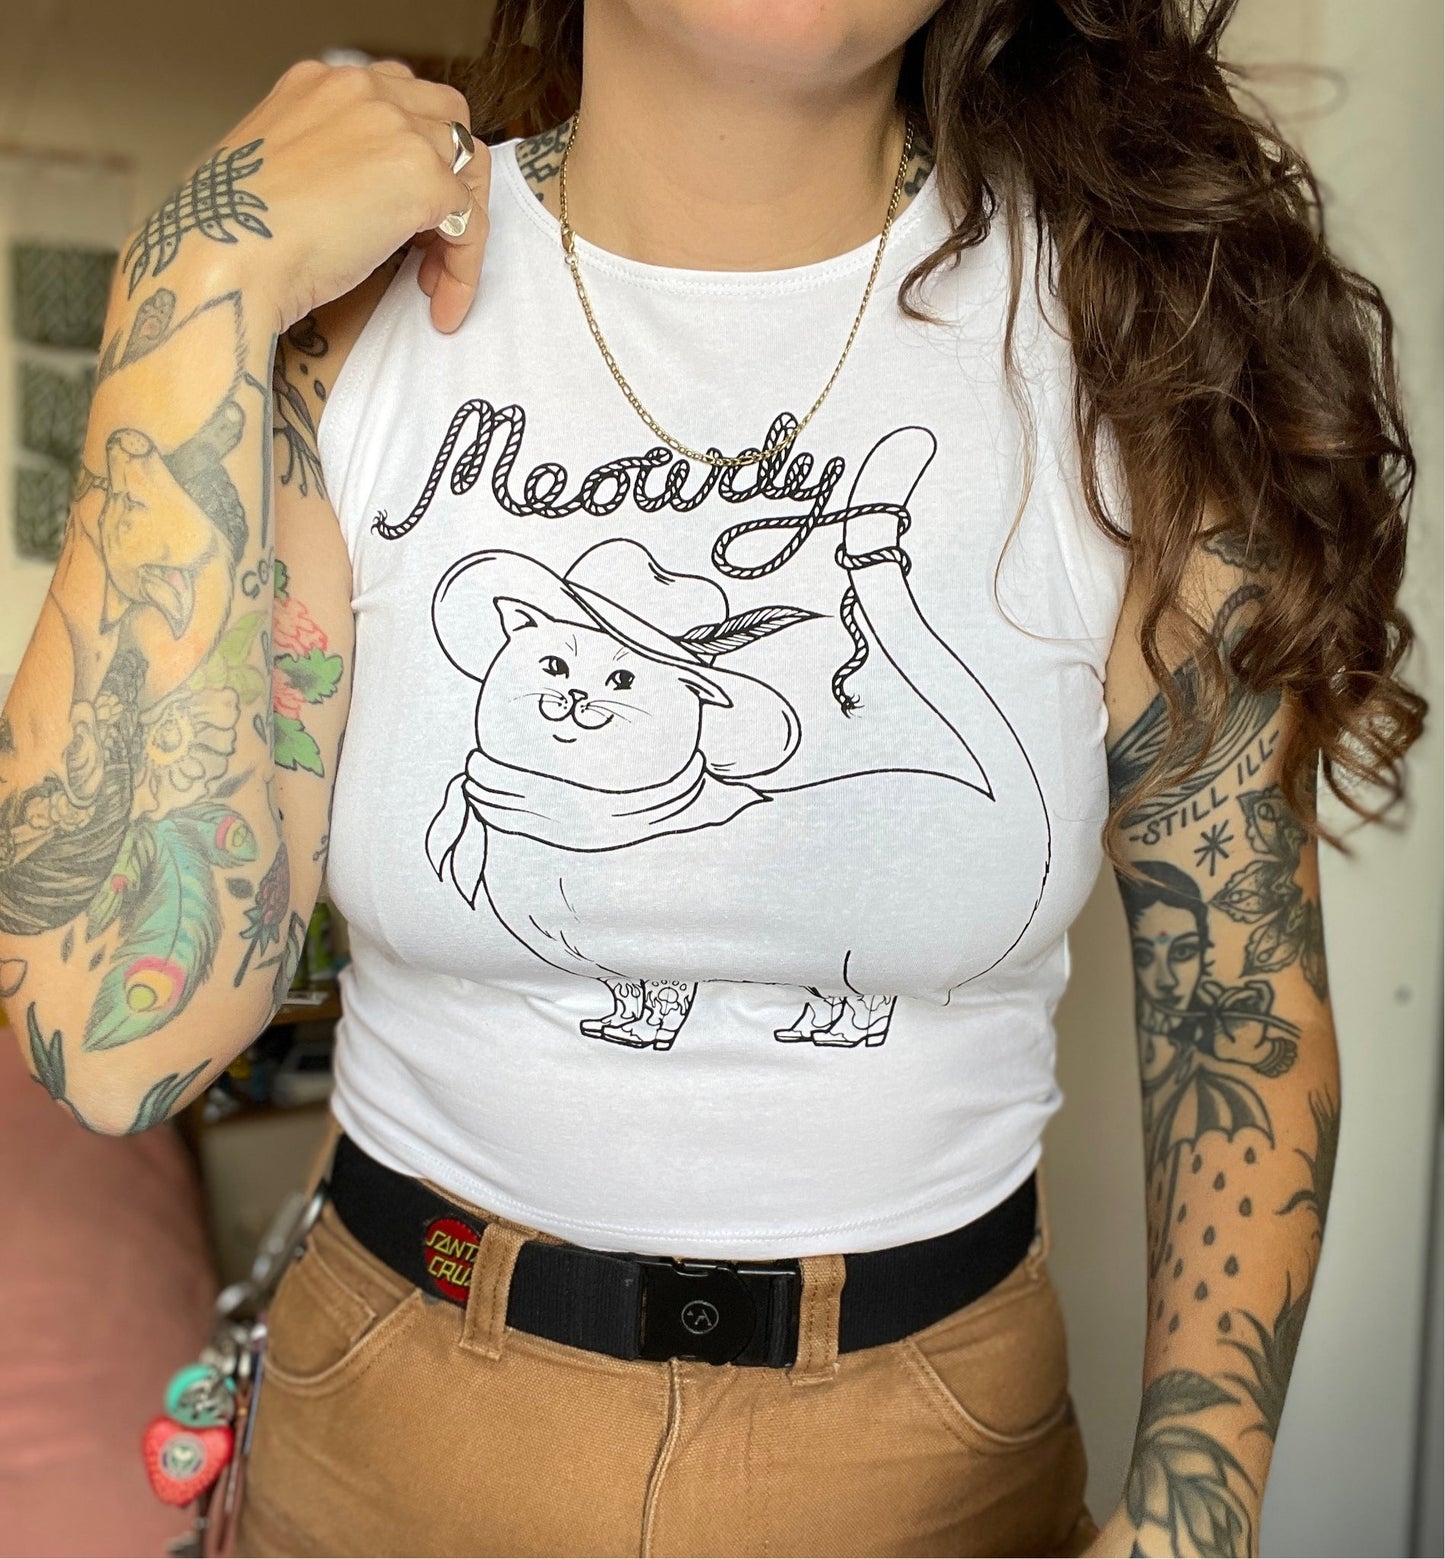 Meowdy Crop Top (black and white)